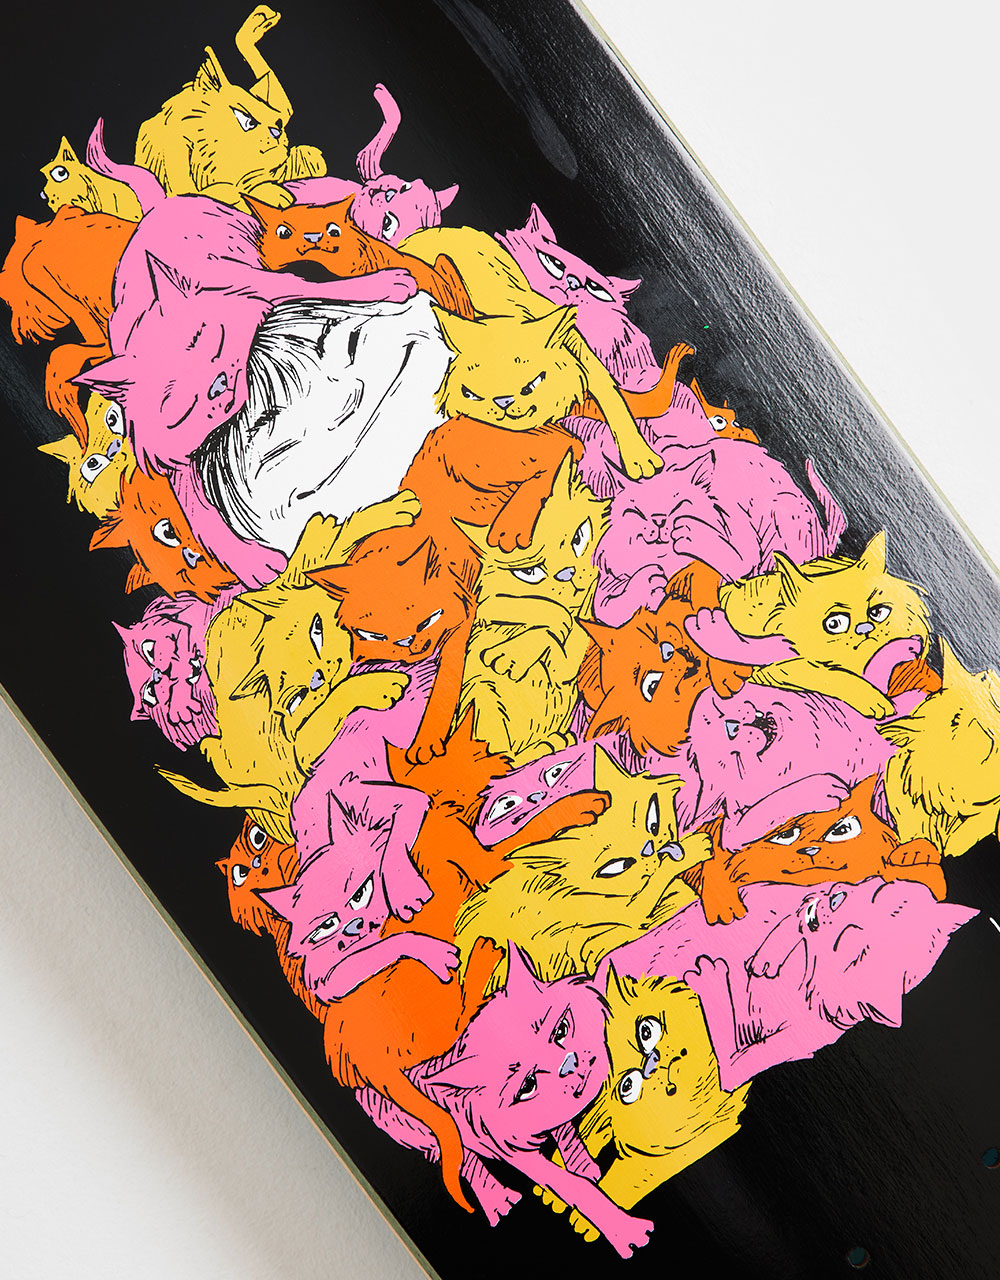 Welcome Nora Purr Pile on Sphynx Skateboard Deck - 8.8"